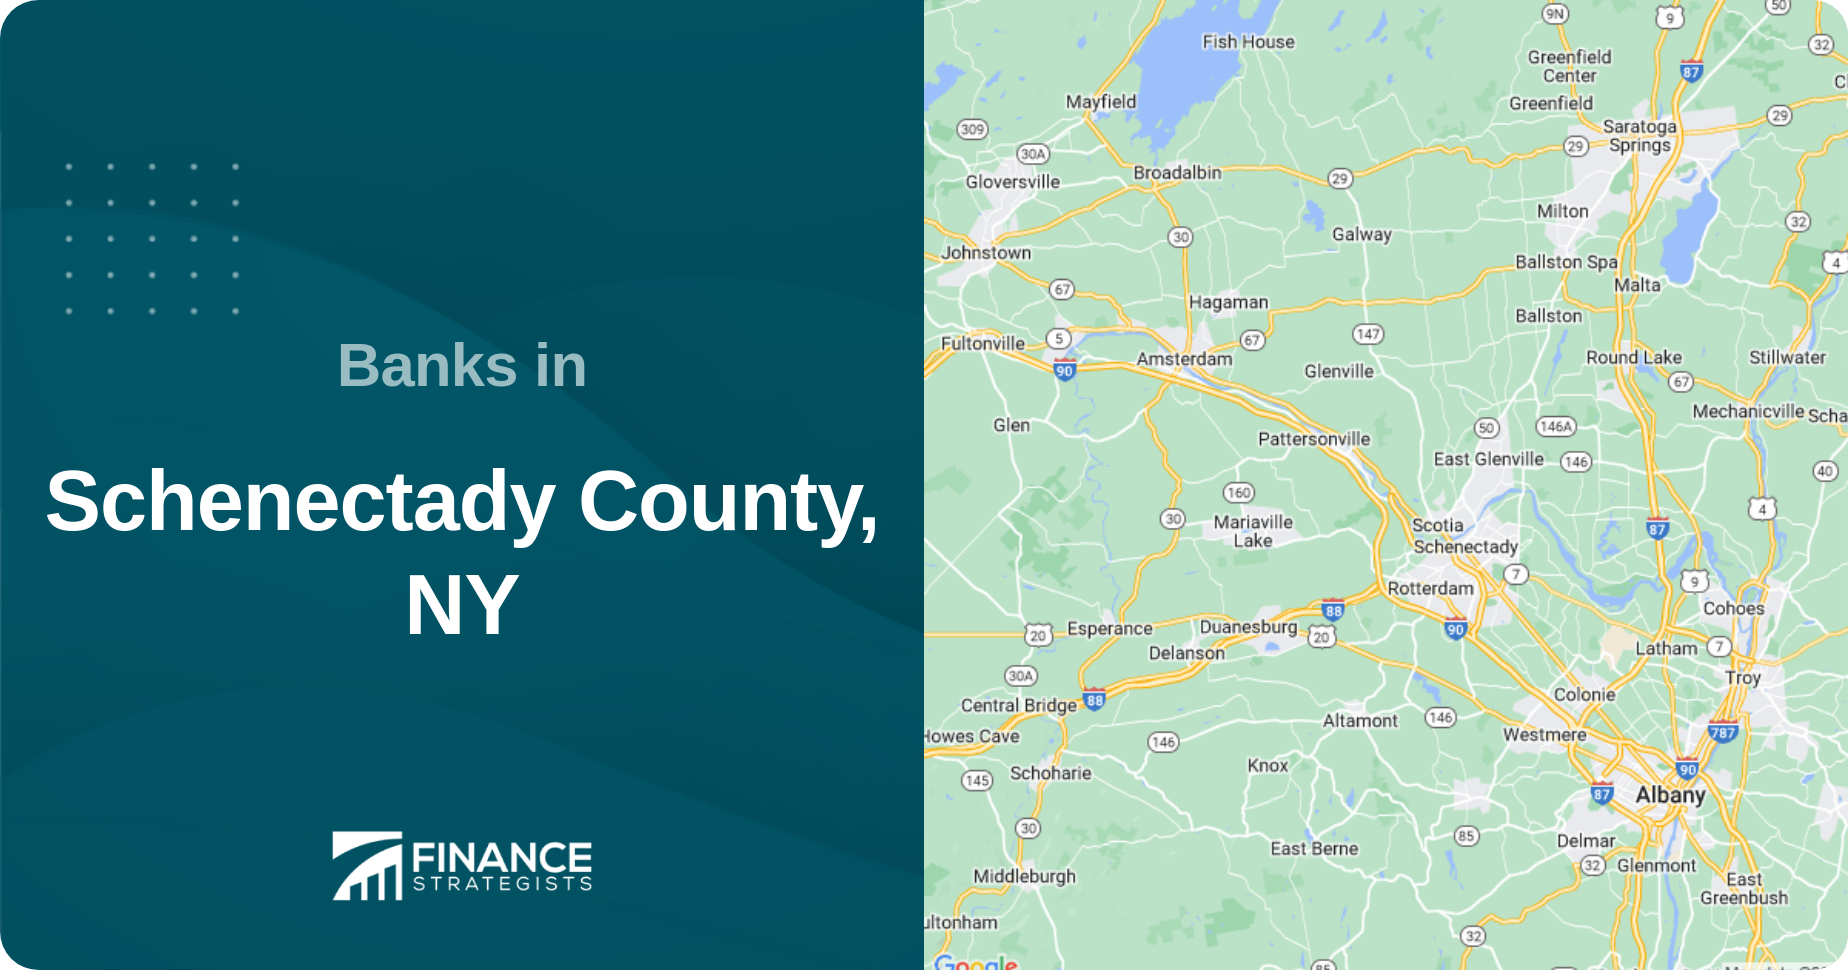 Banks in Schenectady County, NY